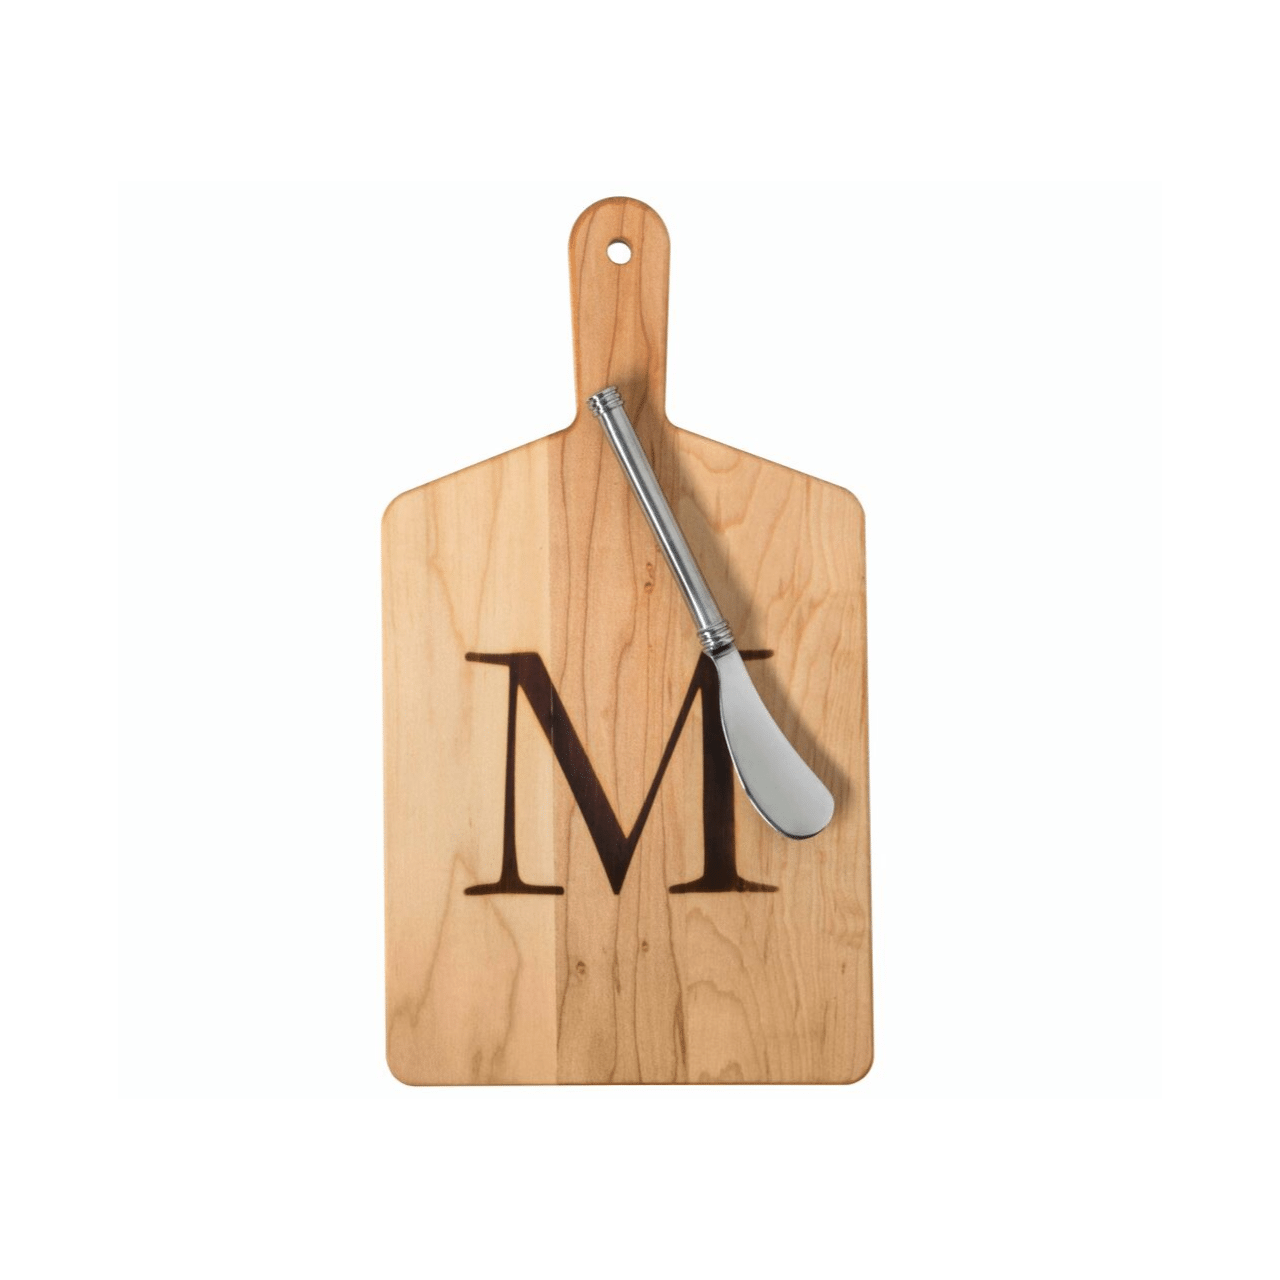 Maple Cheese Board with a Stamped T and Metal Spreader